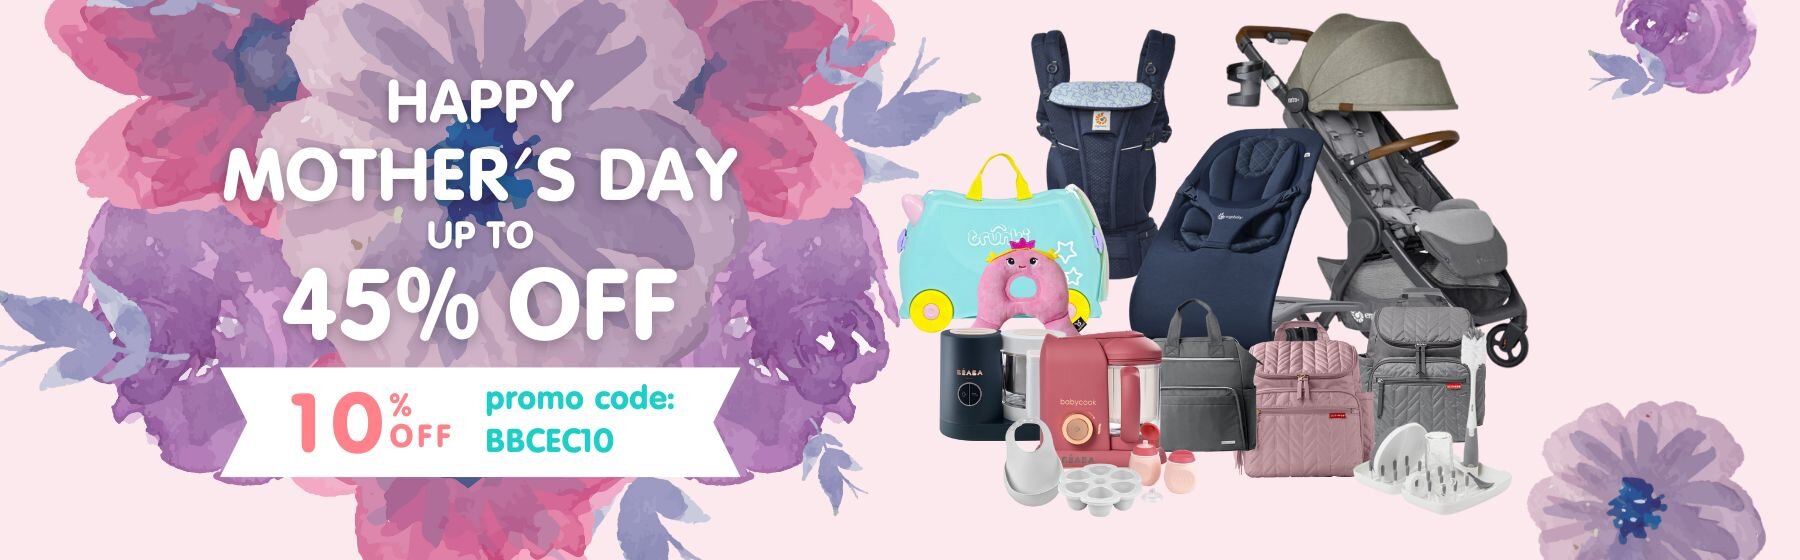 Mother's Day promo Extra 10% off